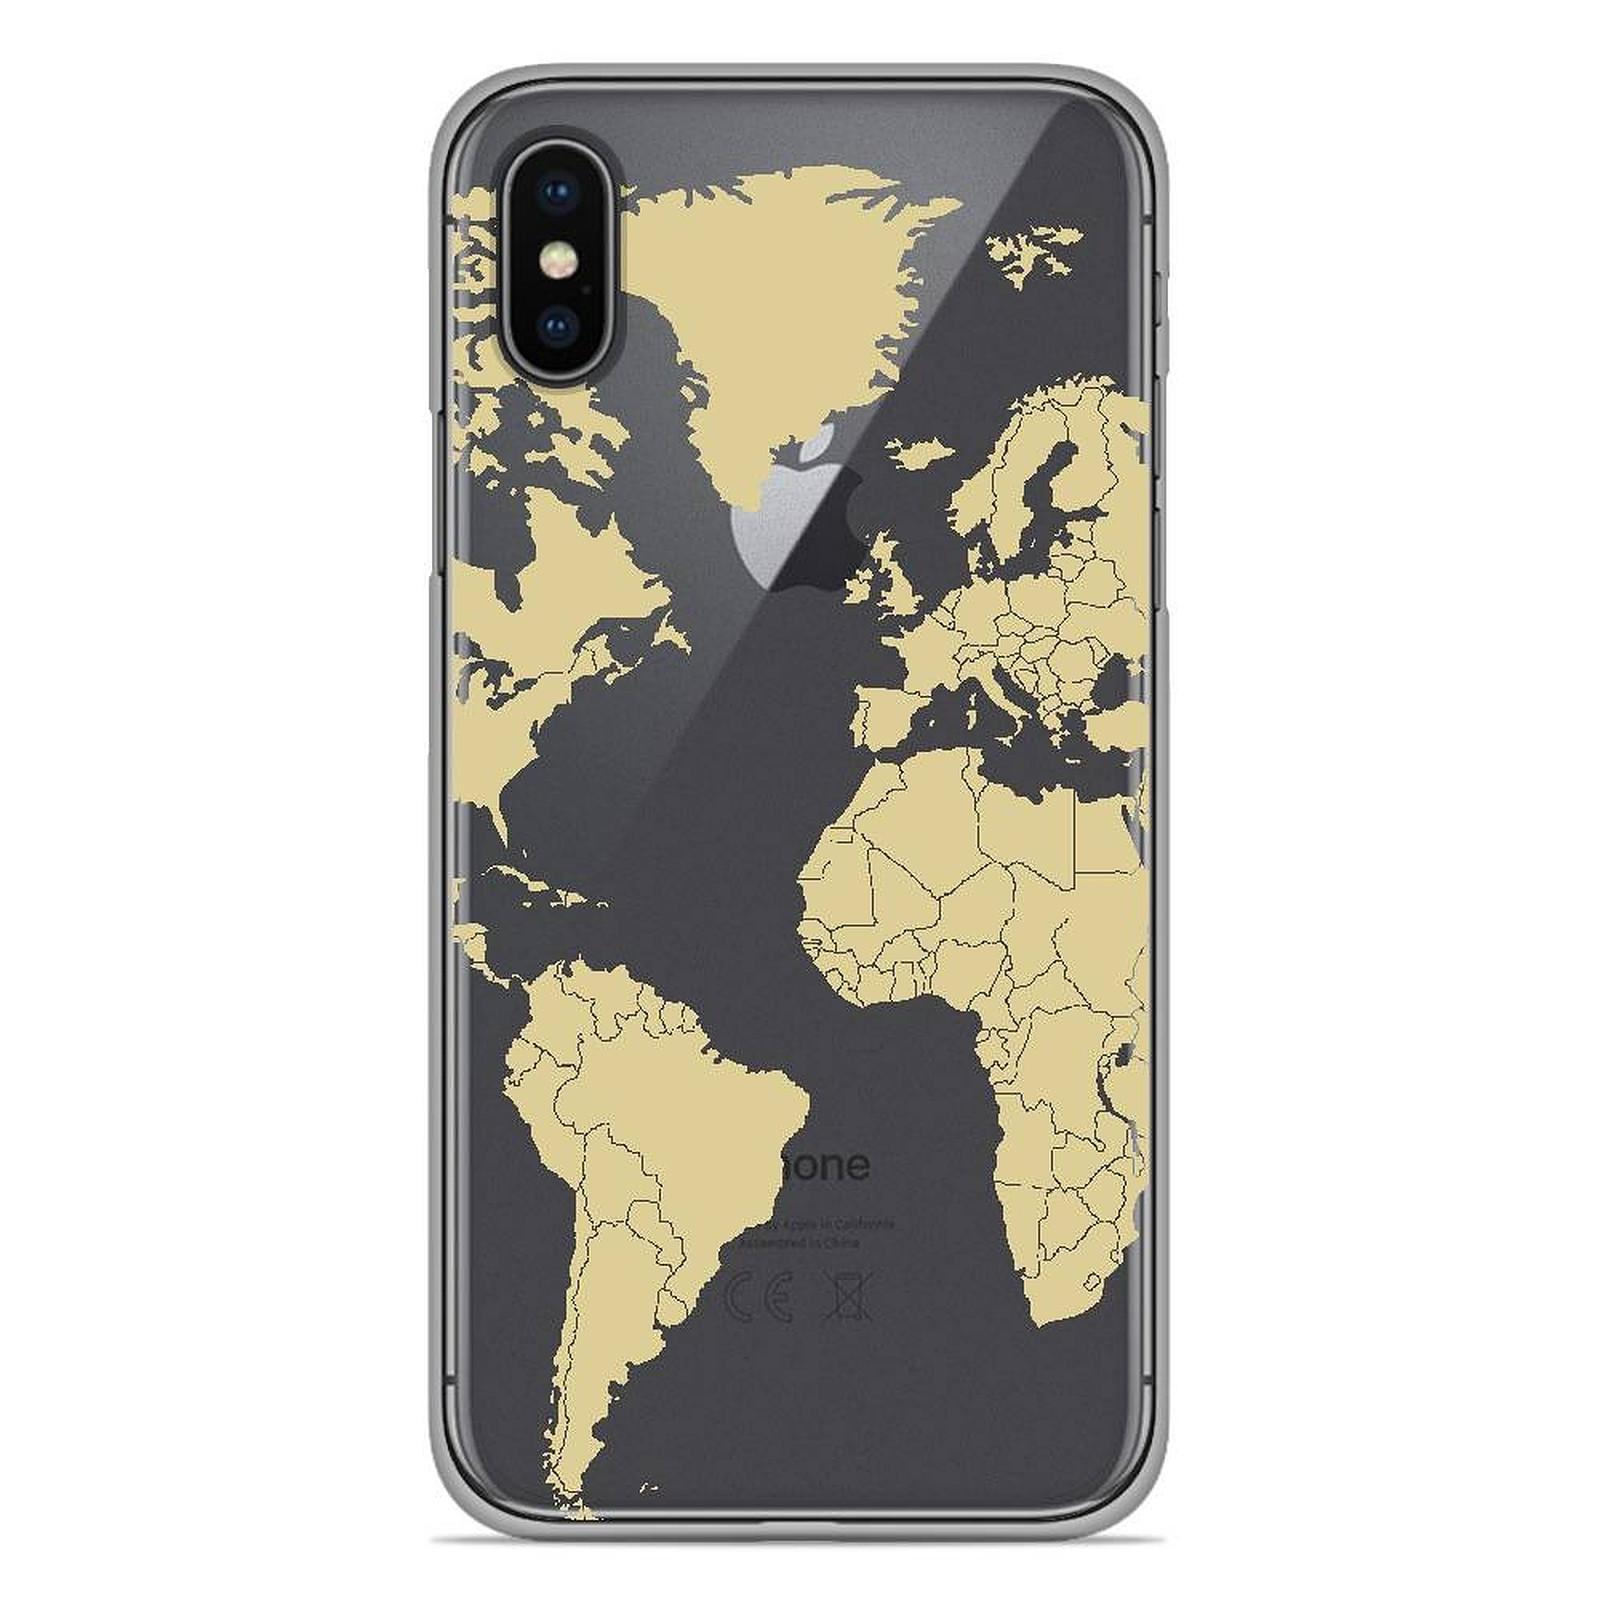 1001 Coques Coque silicone gel Apple iPhone X / XS motif Map beige - Coque telephone 1001Coques